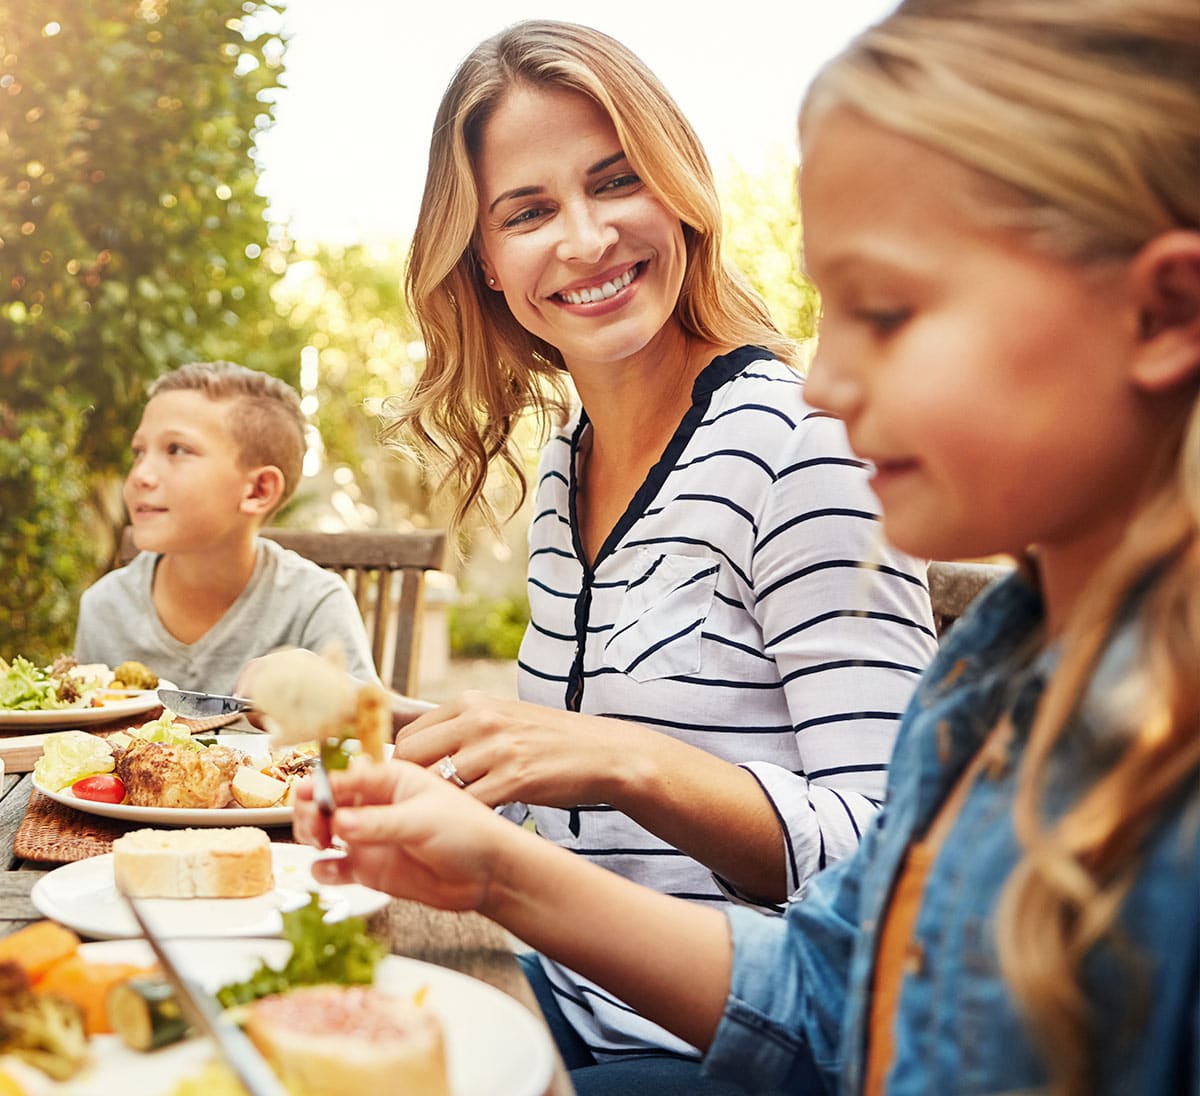 A woman and her children enjoying a meal outdoors.